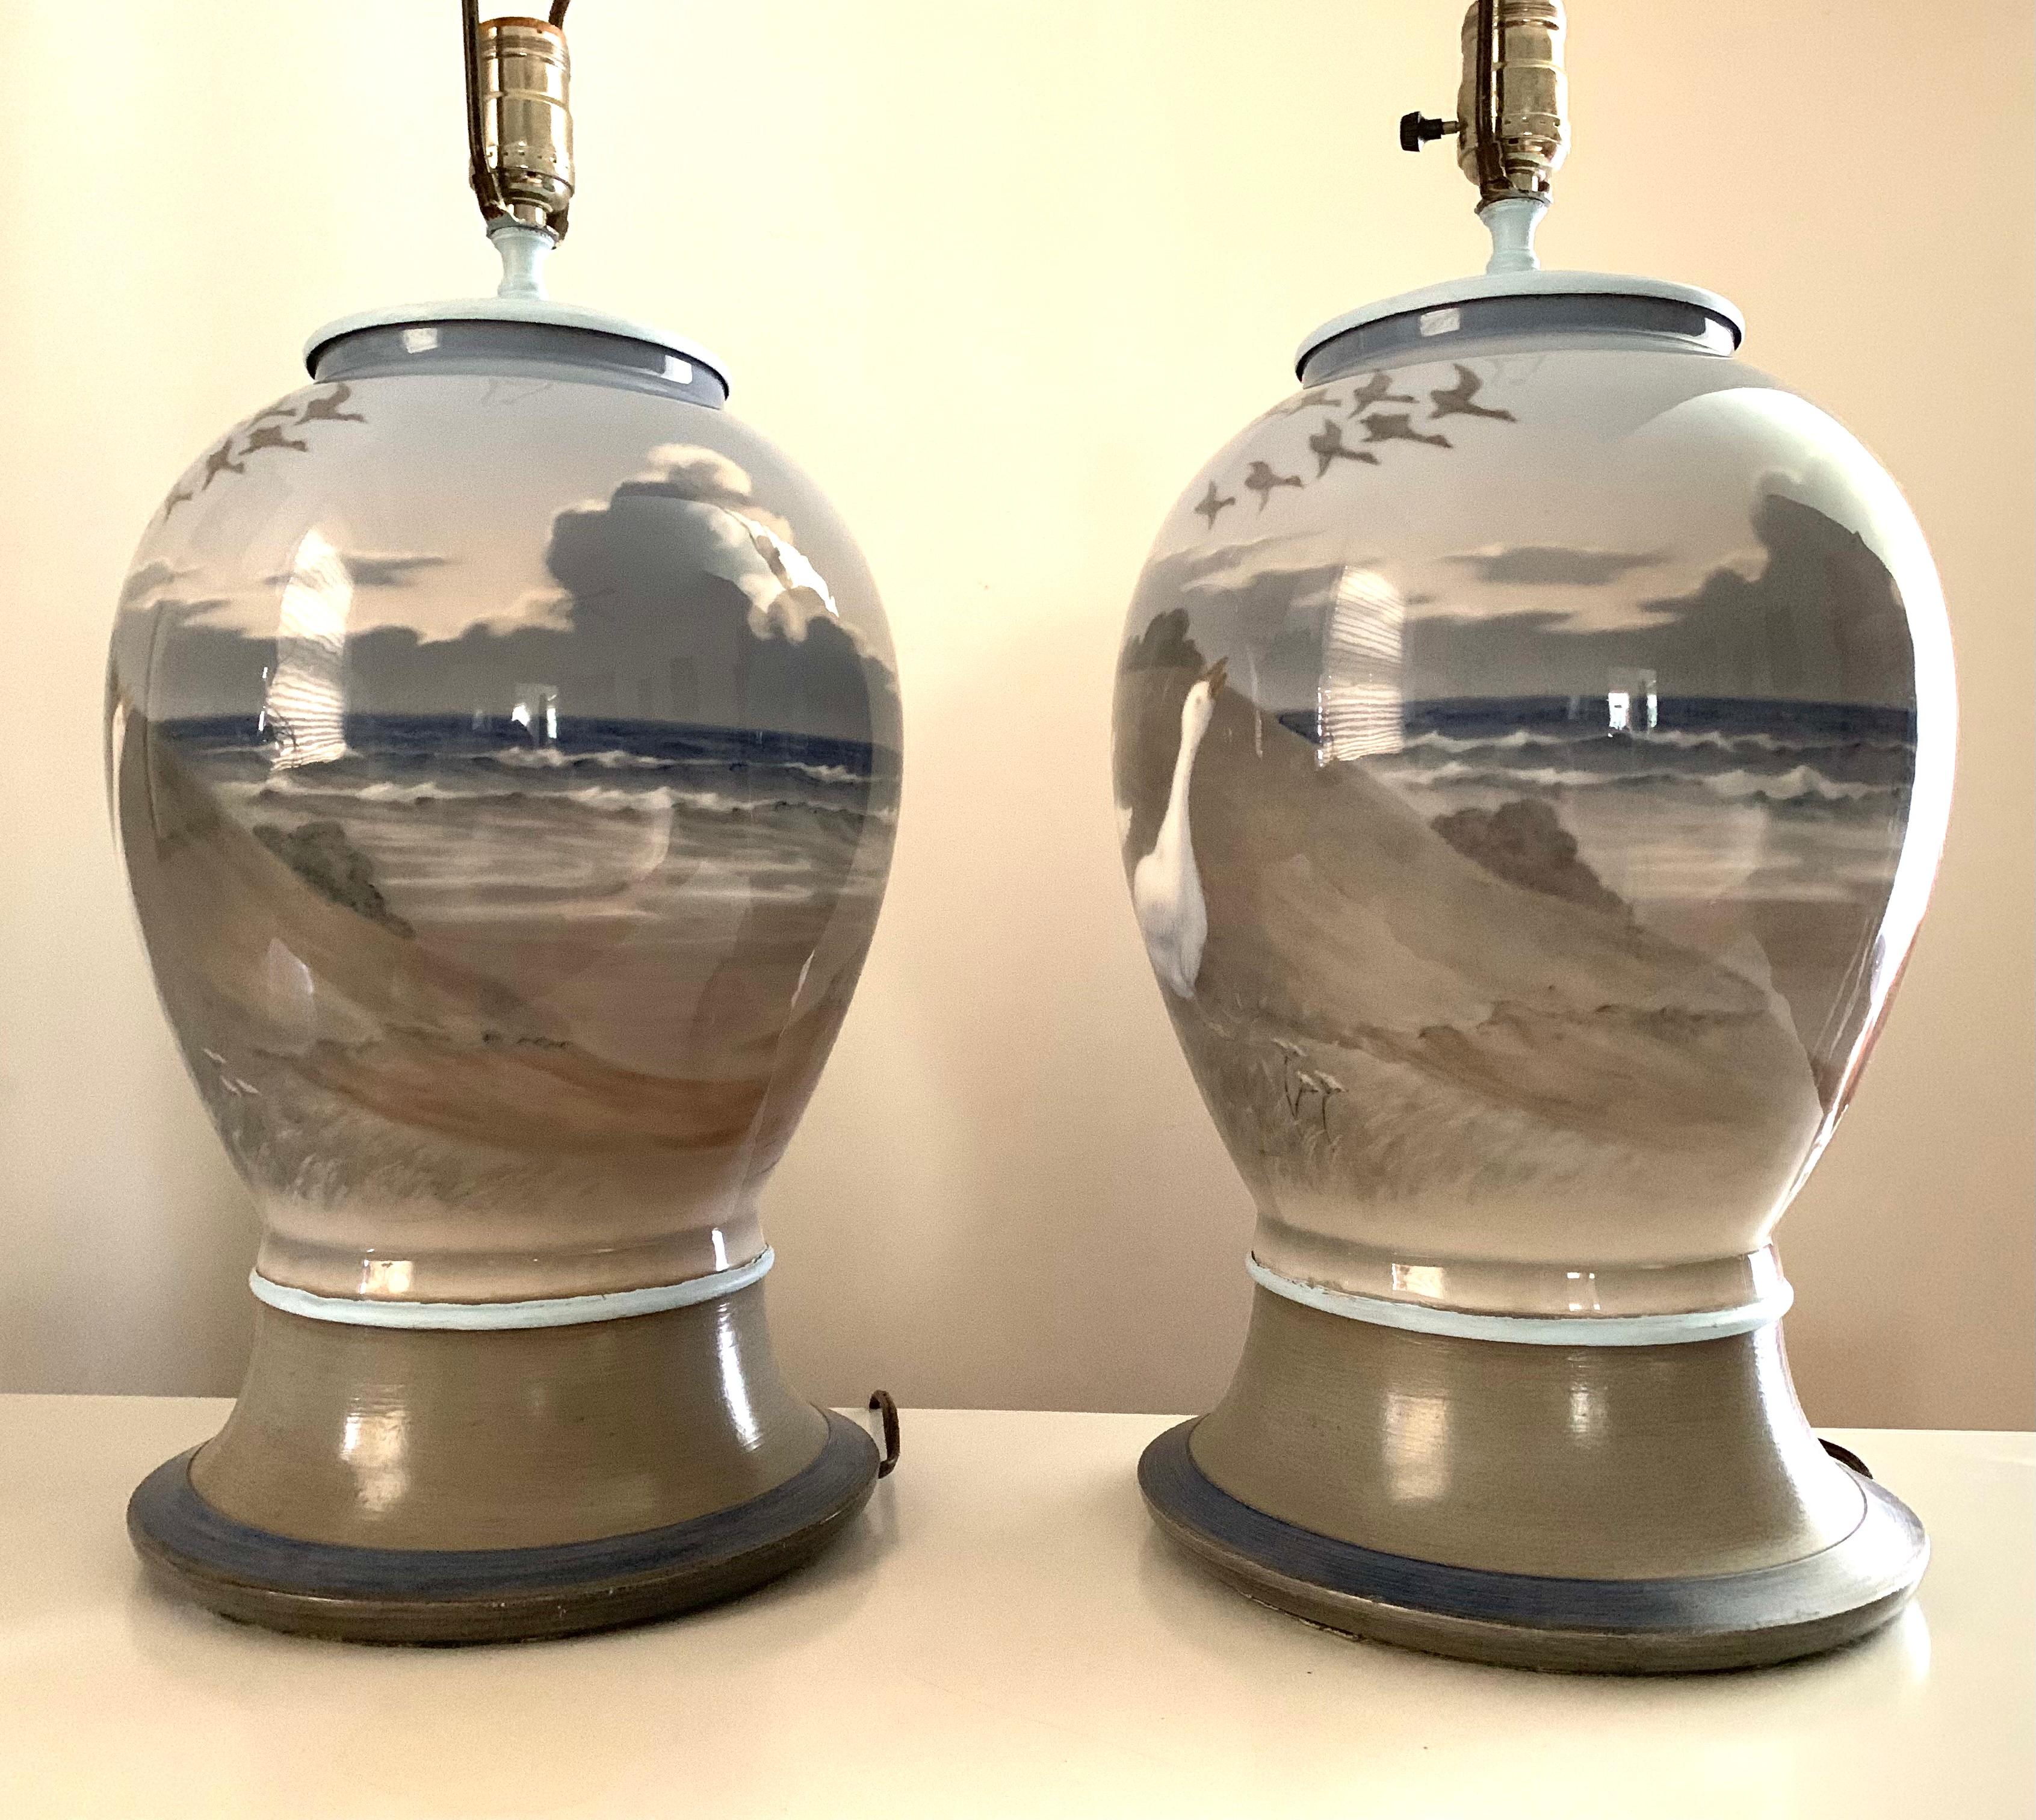 Silvery grey and blue tones create a magical beach sea shore setting depicted in these hand painted custom mounted lamps. The porcelain vessels are Royal Copenhagen, circa 1920 with custom made hand painted complementary wooden bases. Large,